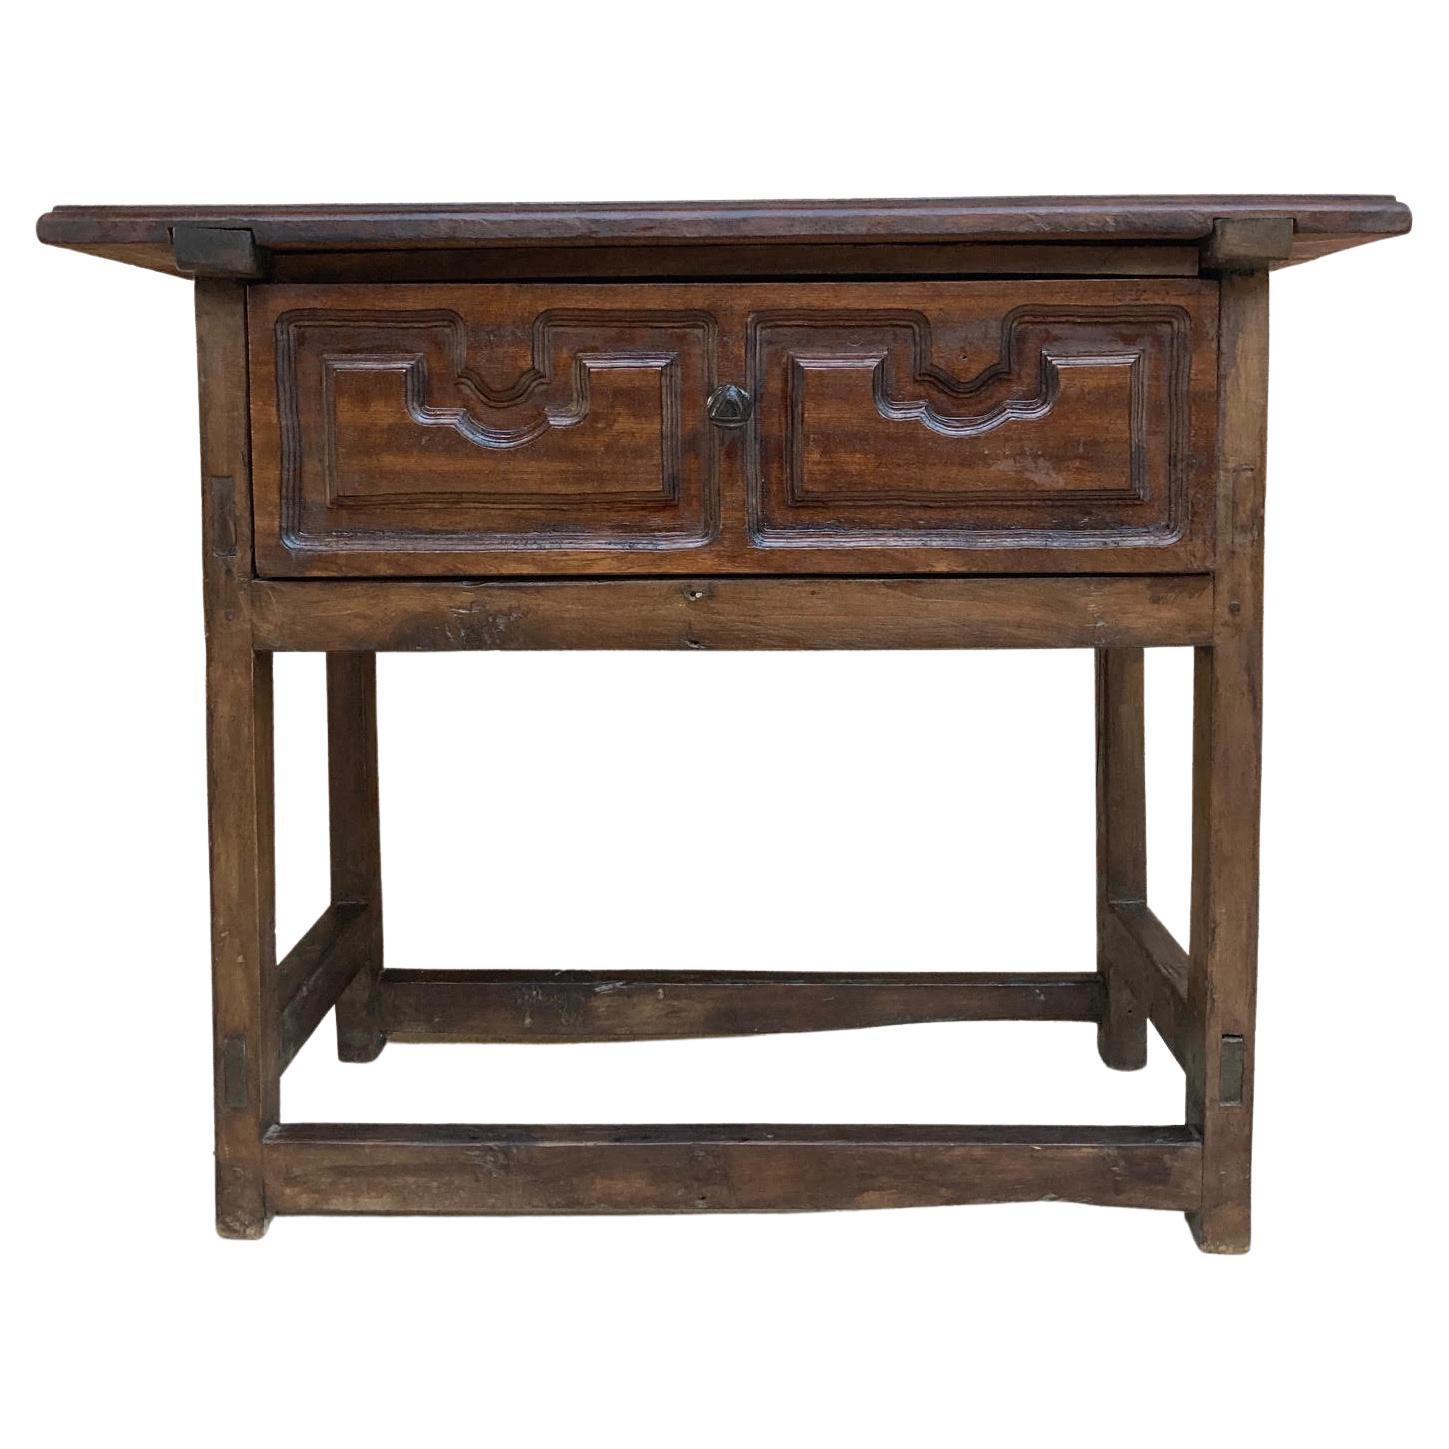 Early 20th Century Spanish Walnut Work Side Table with Large Single Drawer